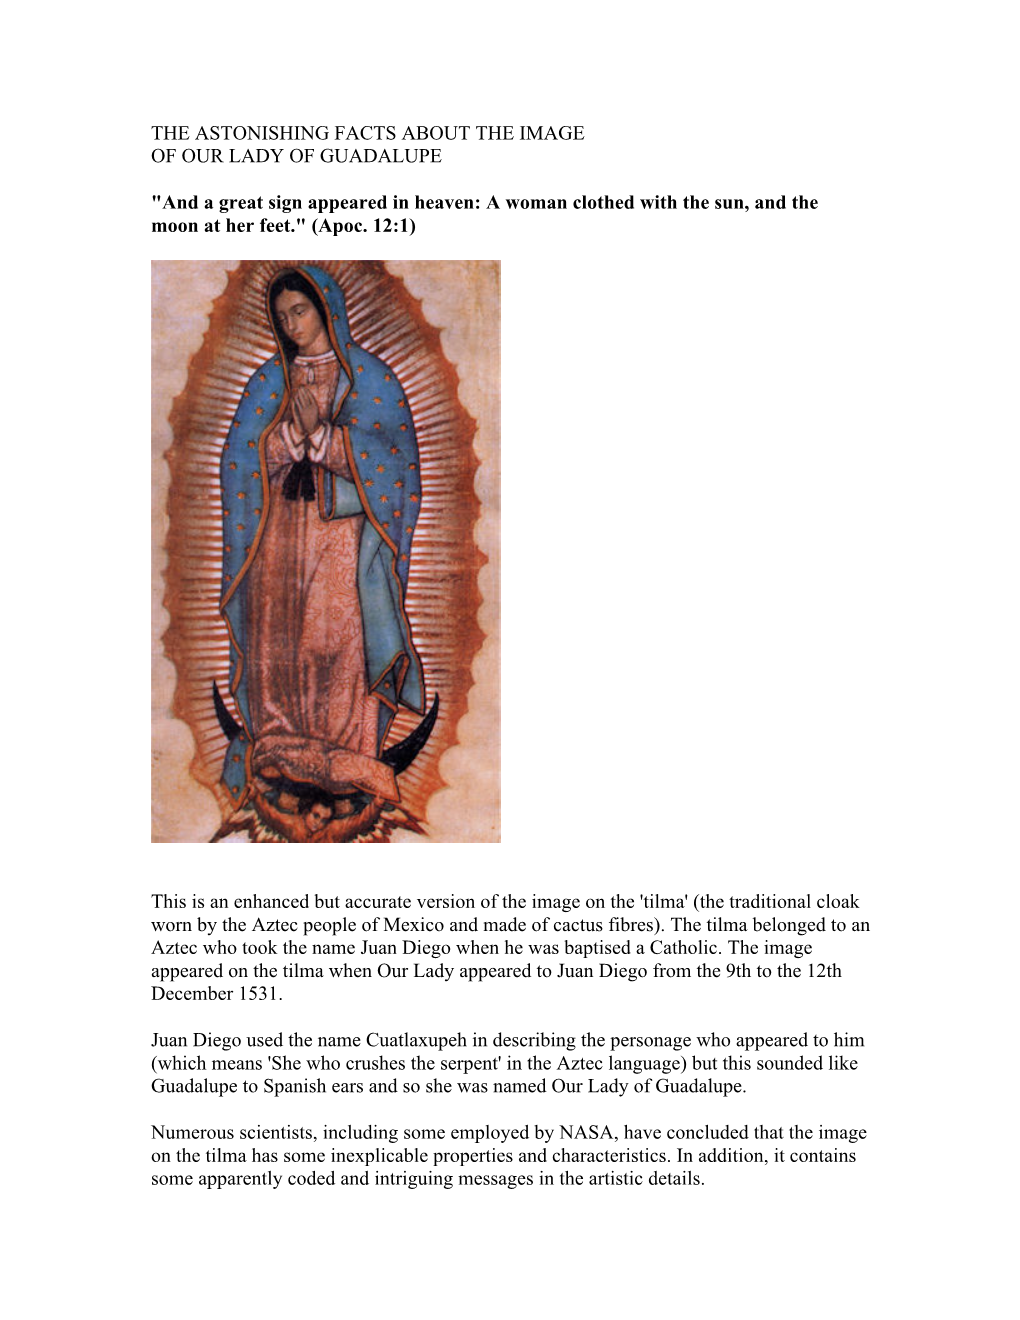 The Astonishing Facts About the Image of Our Lady of Guadalupe